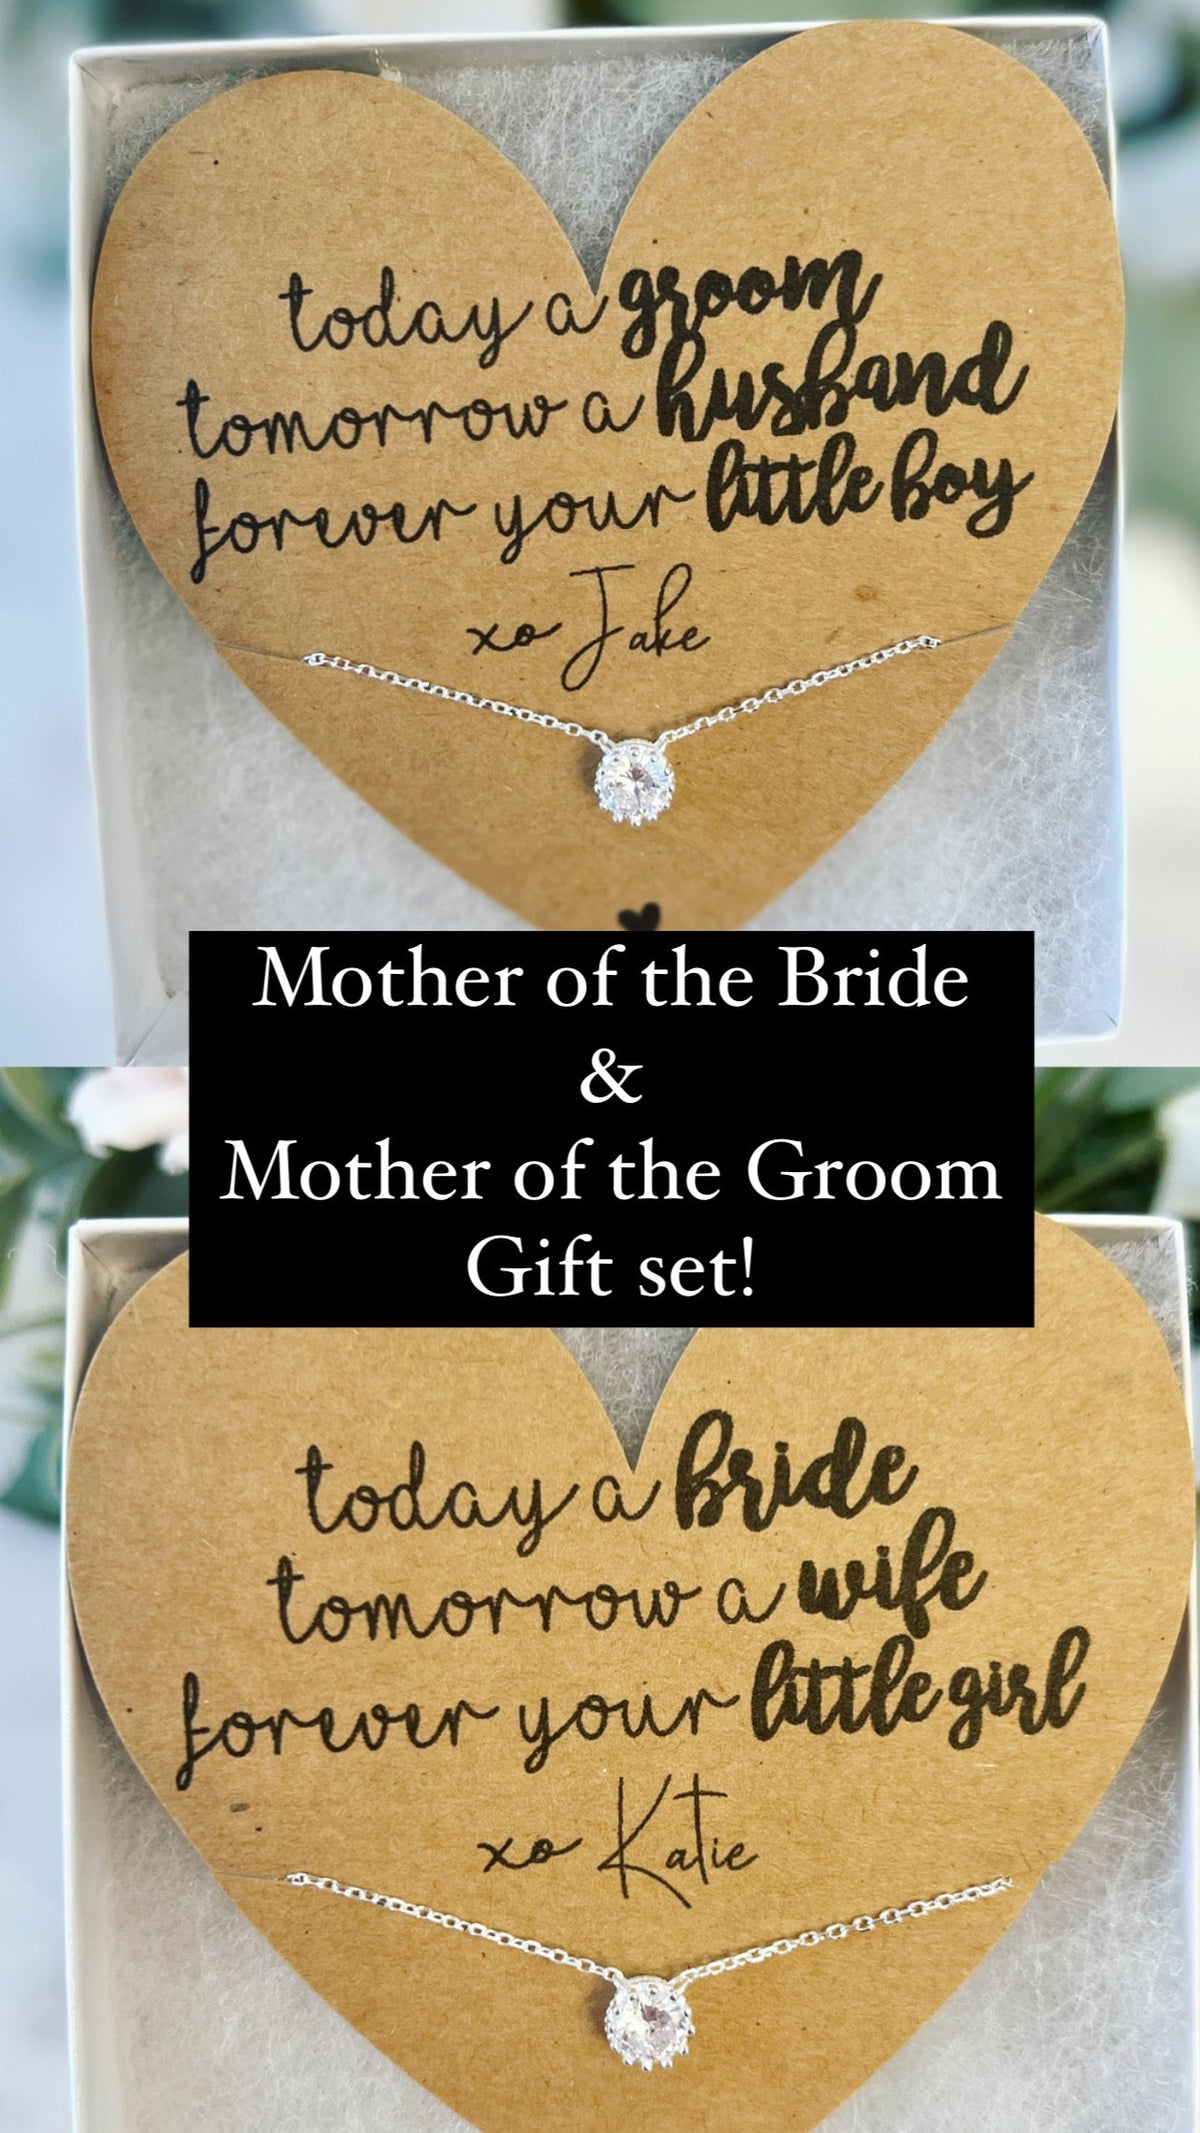 Mother of the Bride AND Groom gift set!